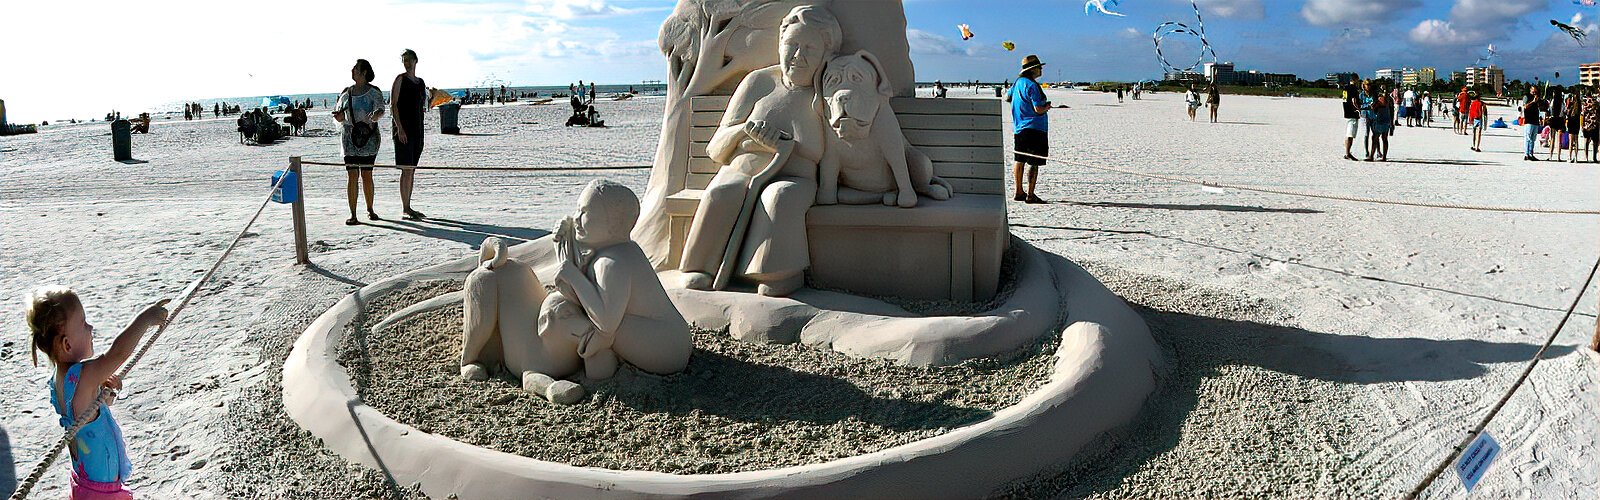 Chapters of life from childhood to old age are depicted in “Doggone Dog Days” by Morgan Rudluff, a sand sculptor and massage therapist from Oakland, CA.